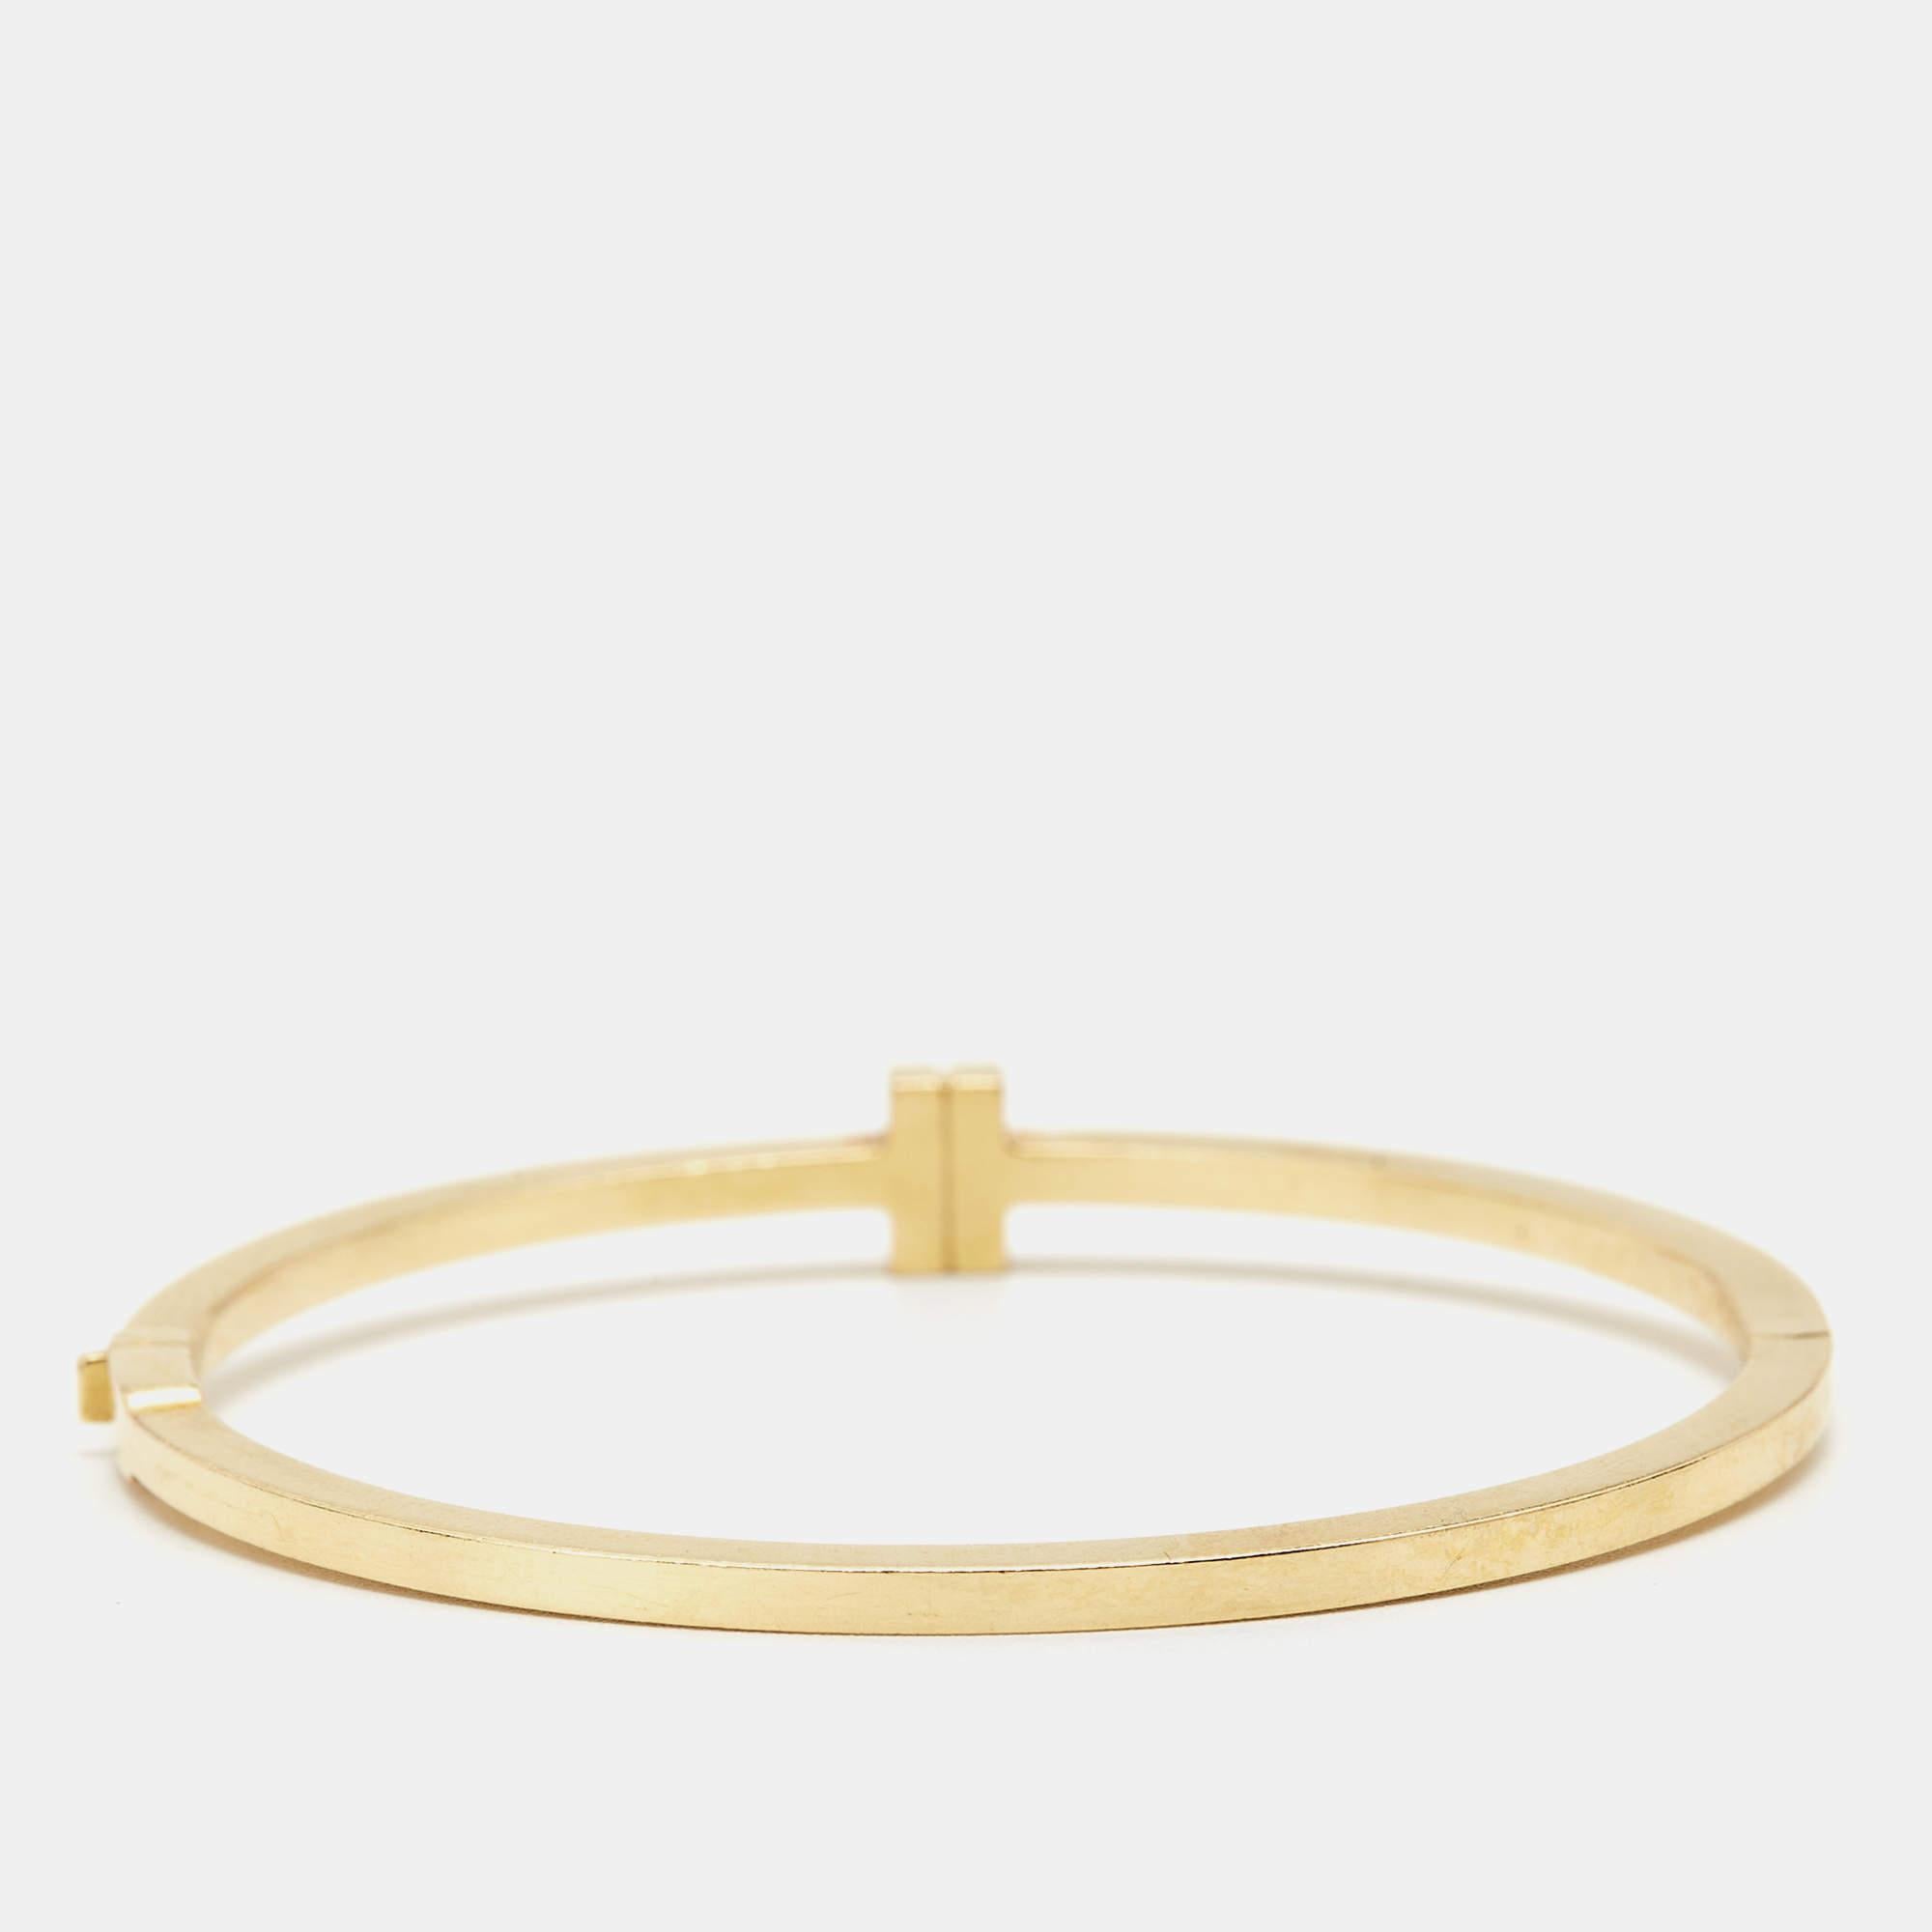 The Tiffany T collection by Tiffany & Co. has been inspired by the city of New York. Each piece comes with a distinct shape that boasts fabulous style and structure. This T Wire bracelet is crafted from 18K yellow gold and styled as a wire-like band